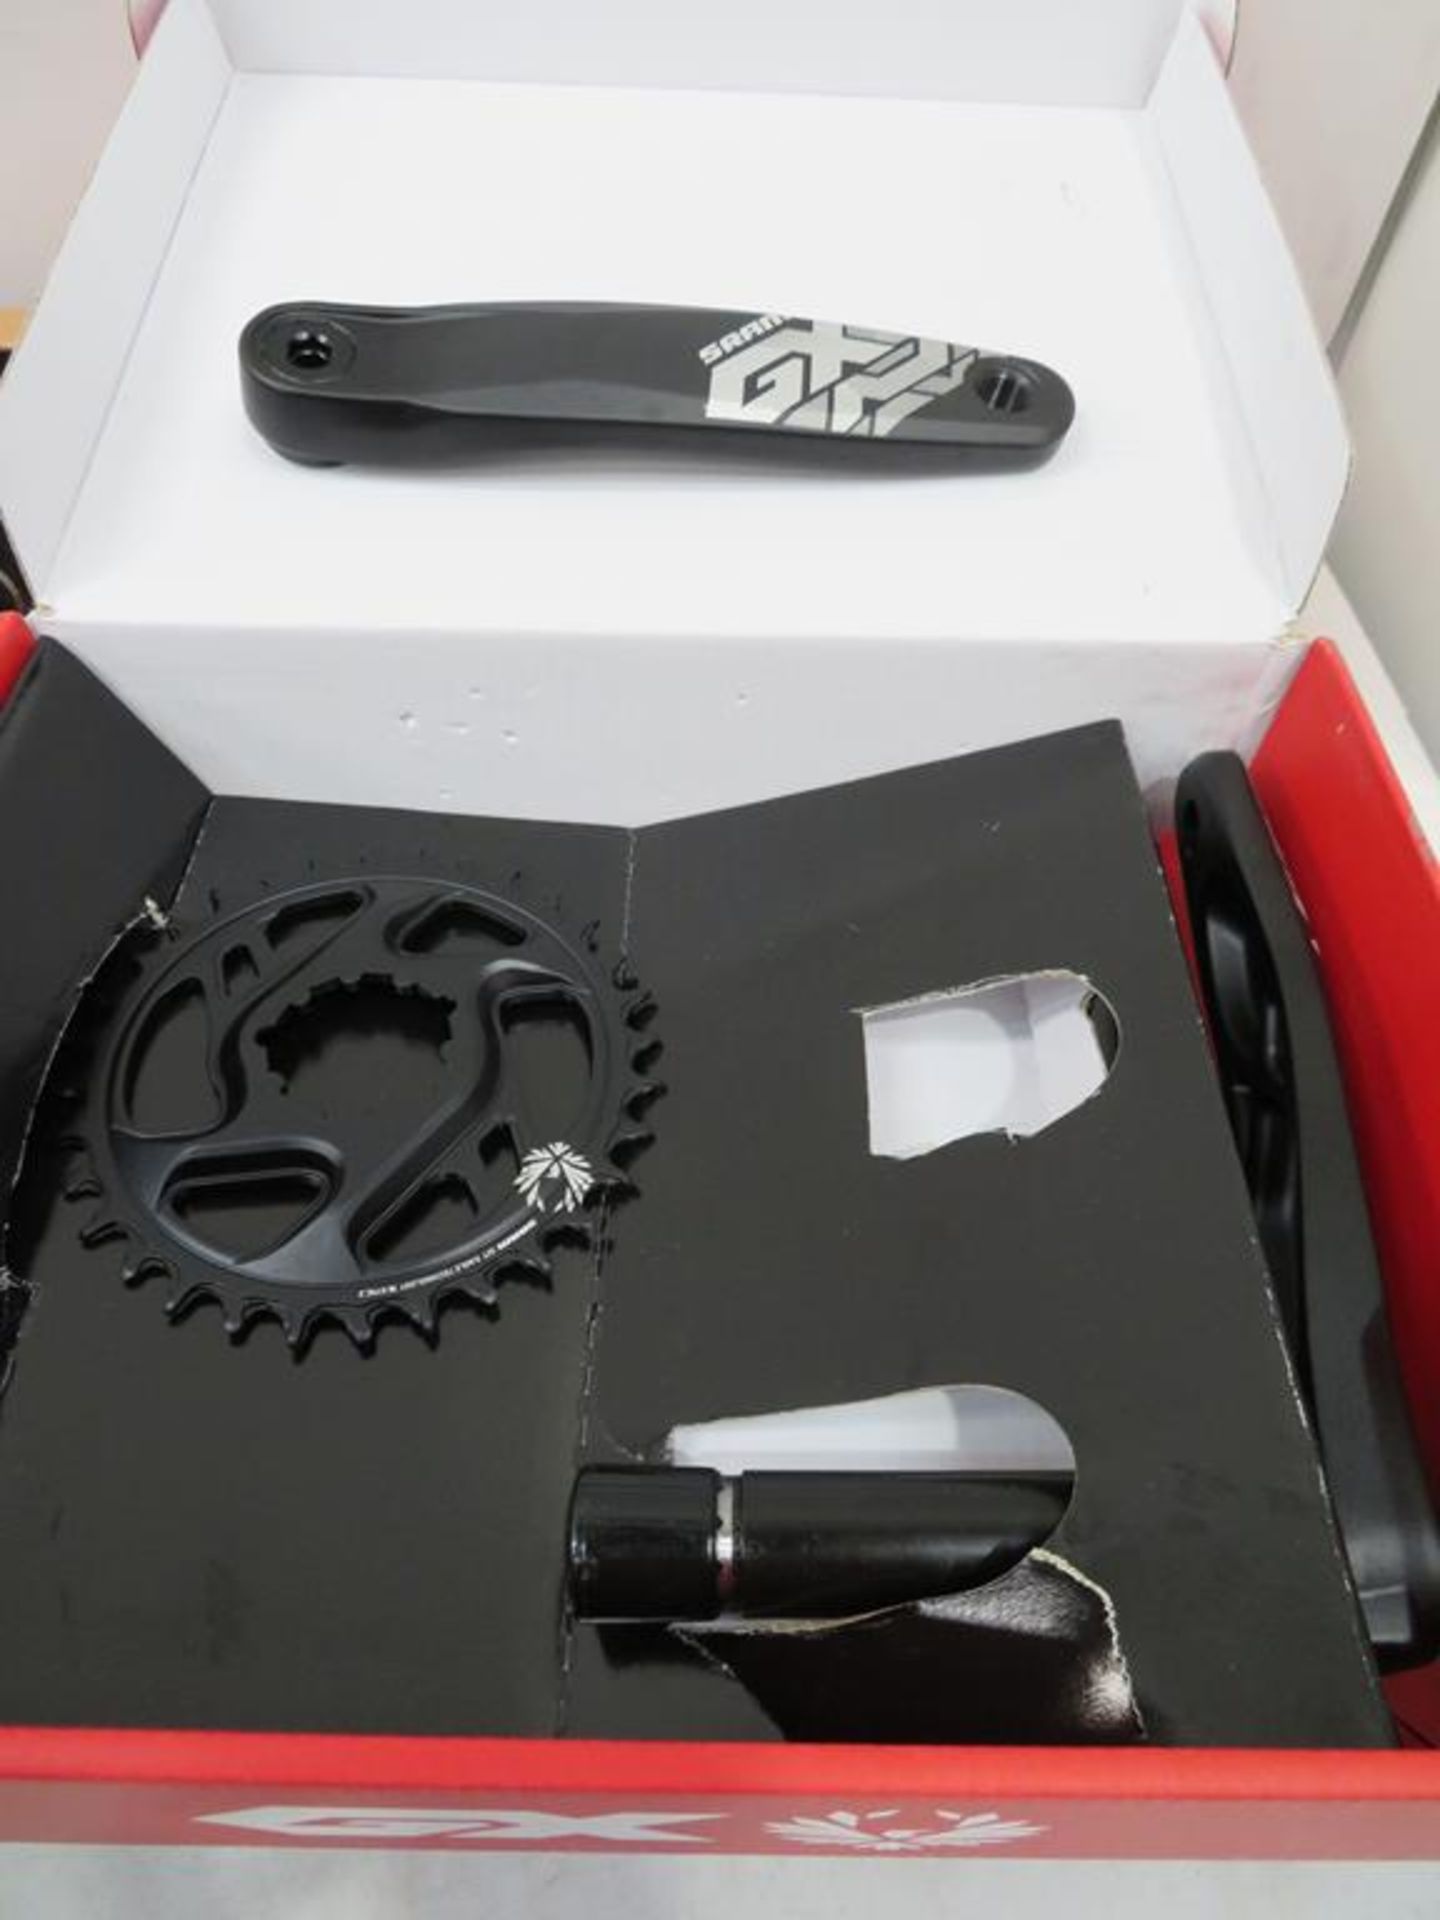 SRAM GX Eagle Crank Direct Mount Chainring - Image 3 of 6